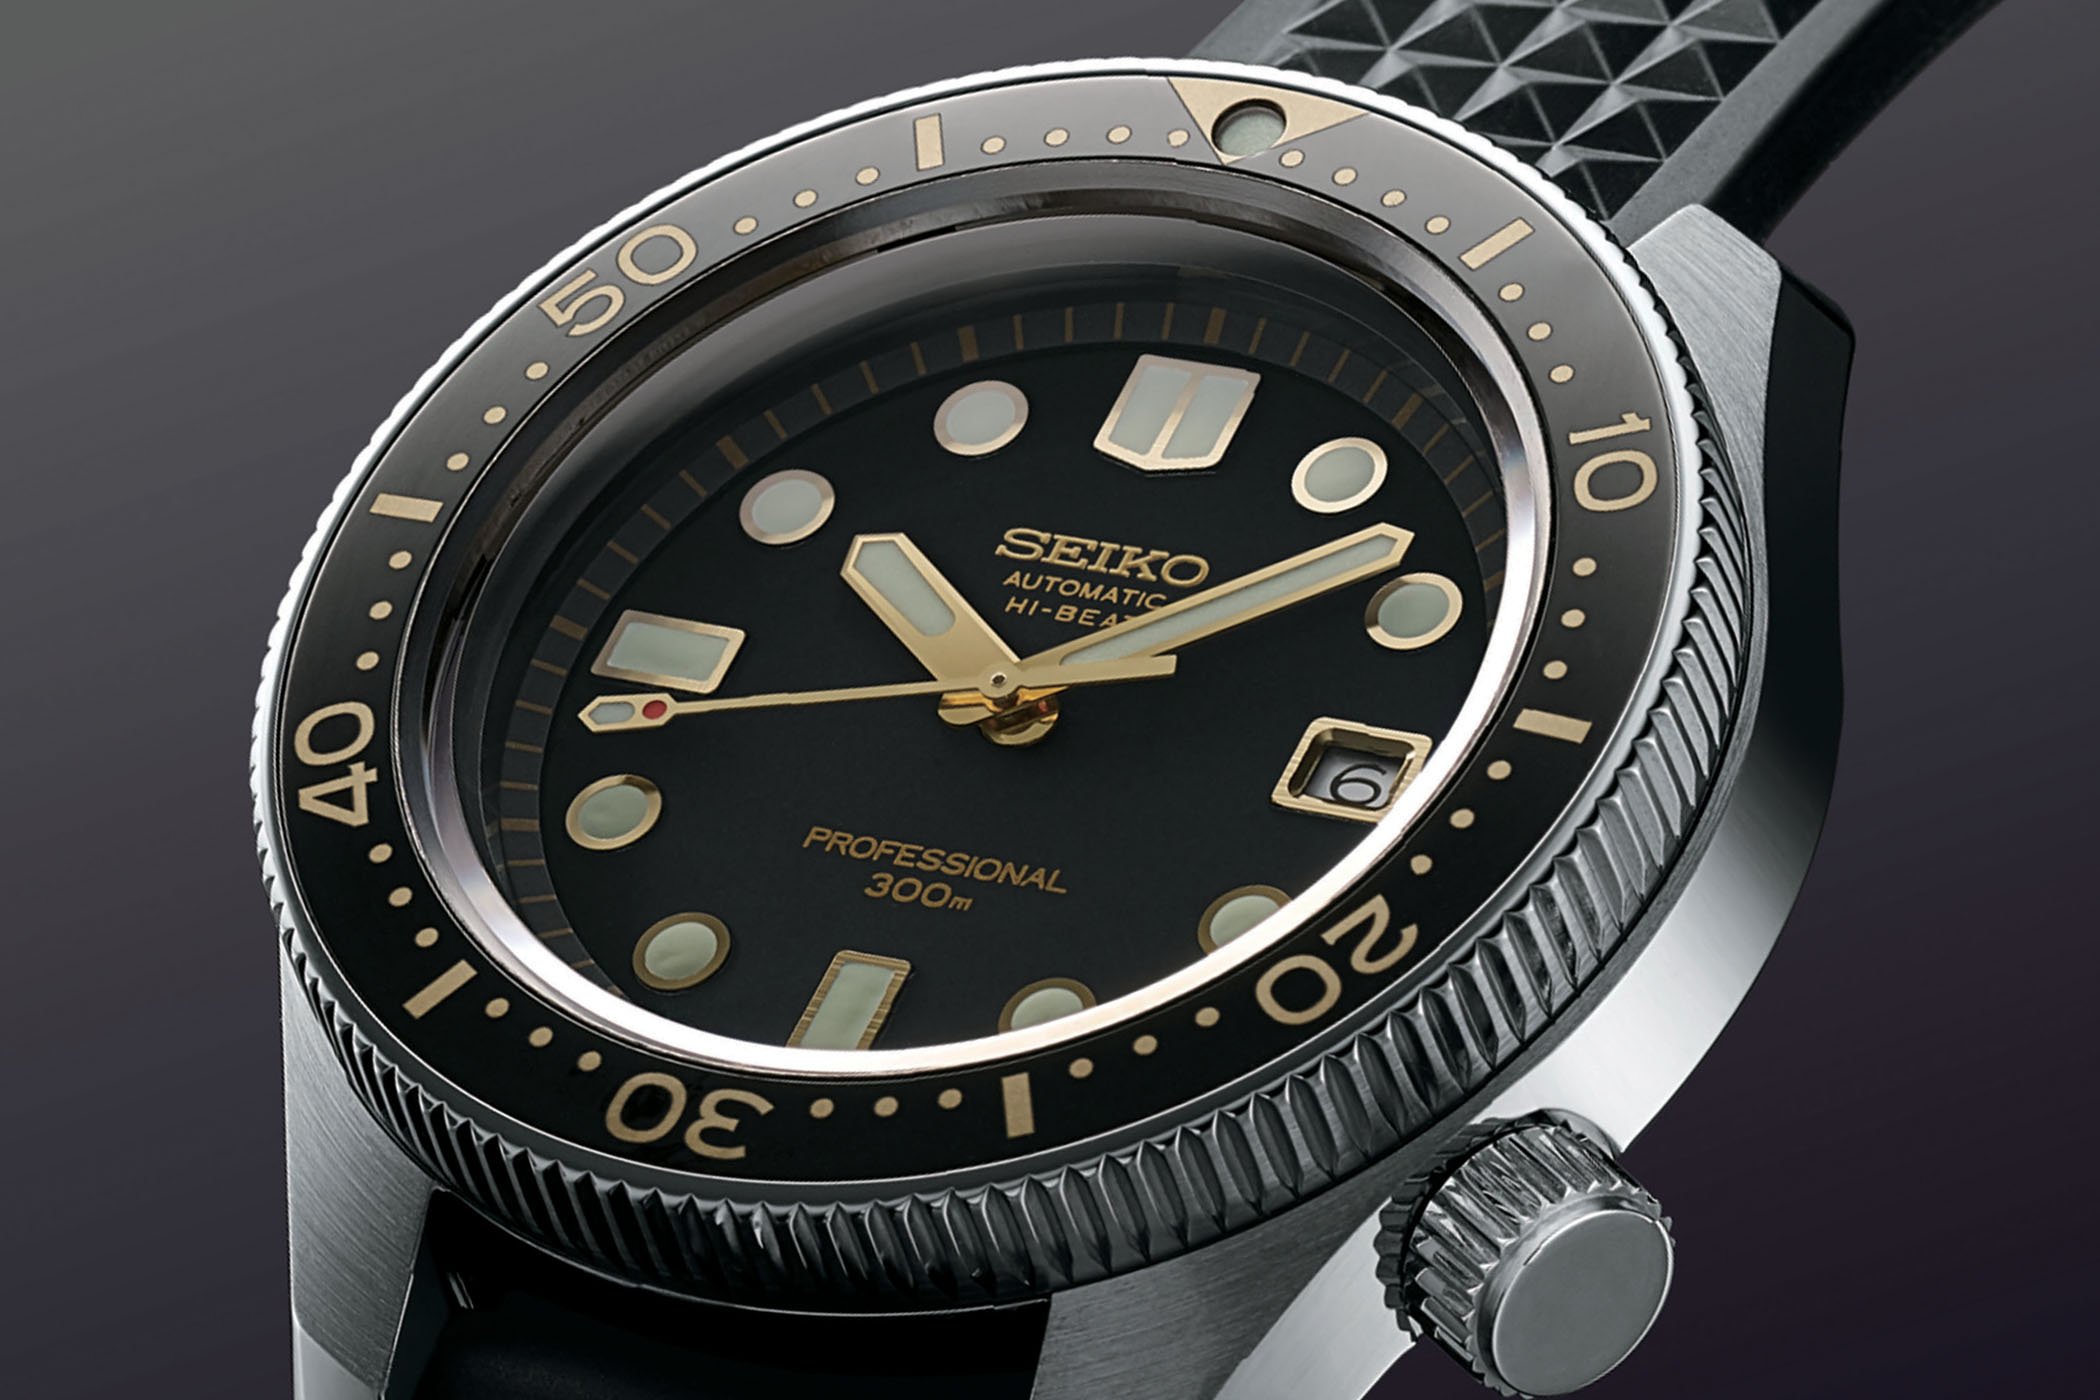 Diver Watches - How to Differentiate Them From the other Types of Watches